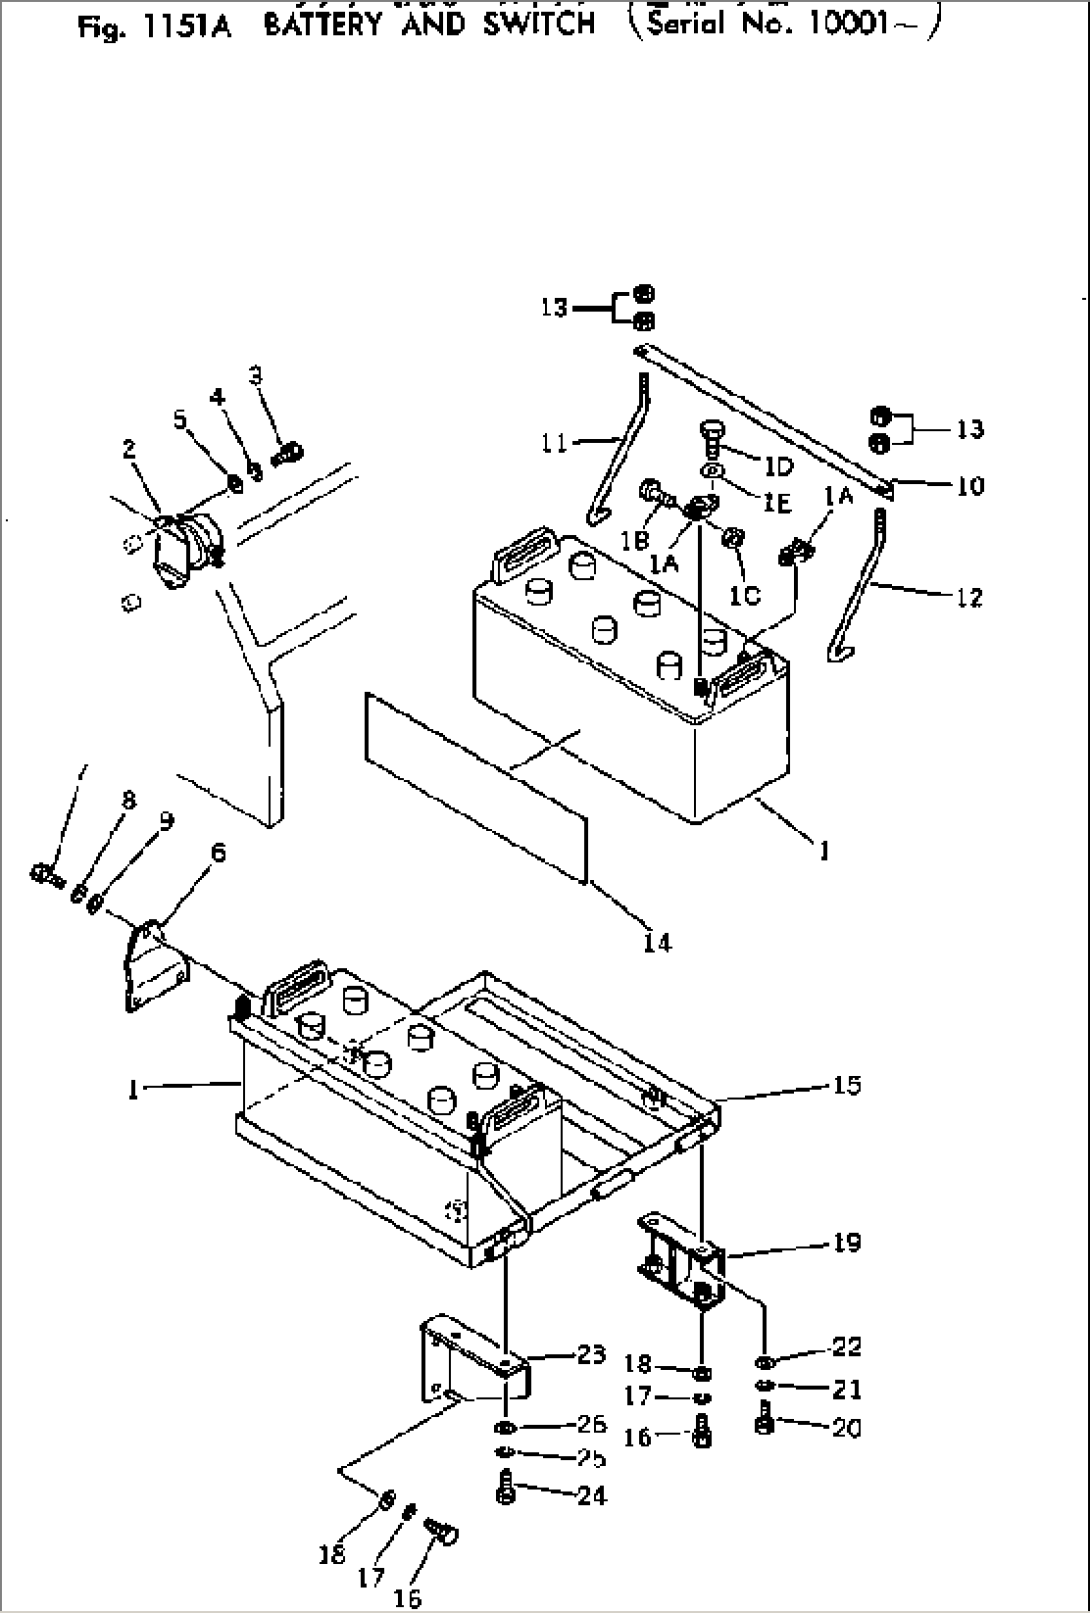 BATTERY AND SWITCH(#10001-)